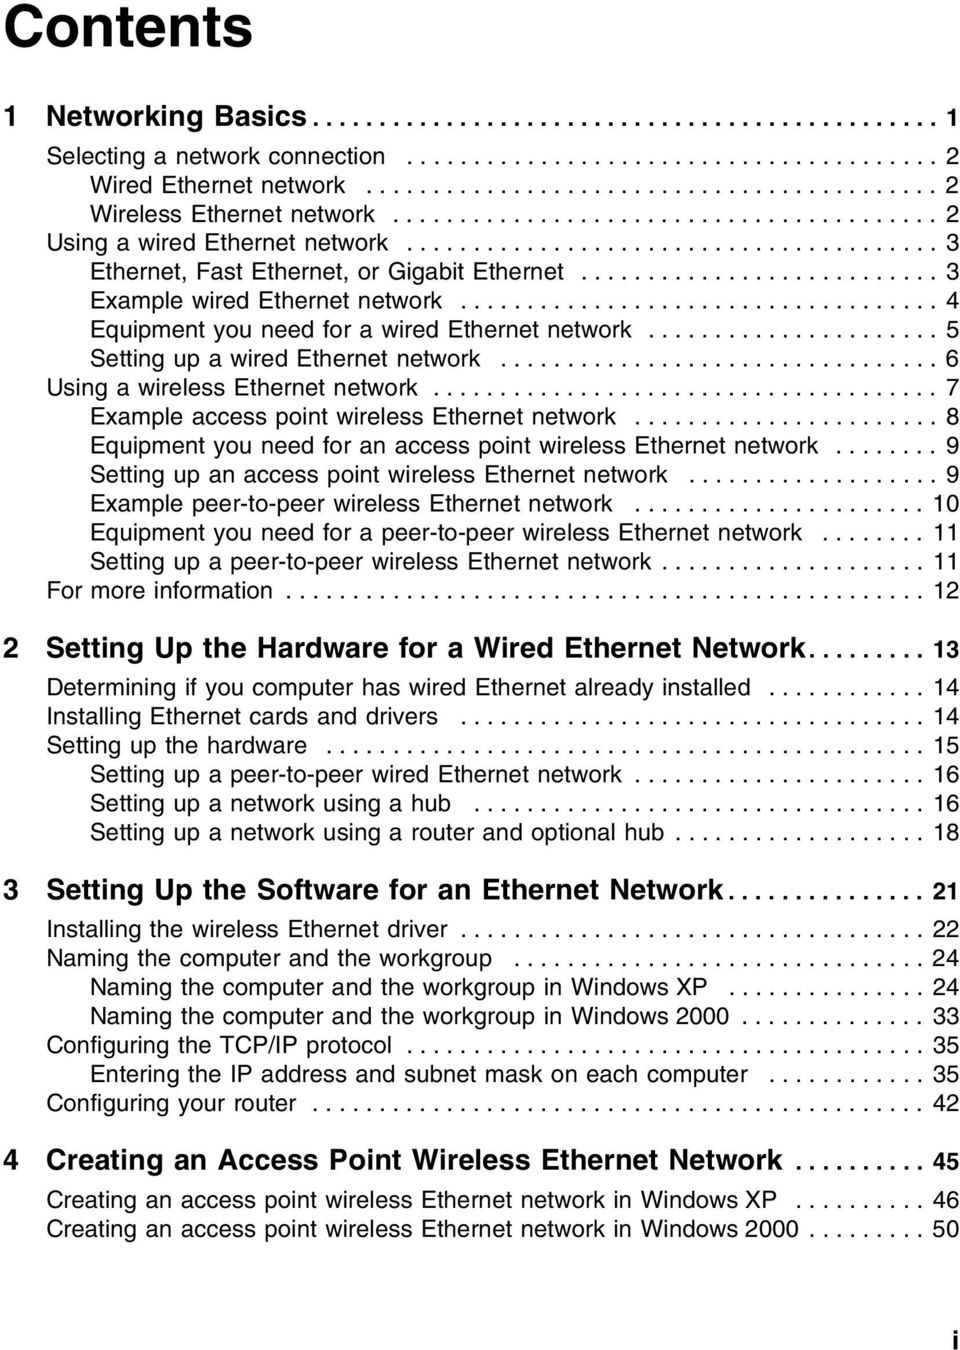 .......................... 3 Example wired Ethernet network.................................... 4 Equipment you need for a wired Ethernet network...................... 5 Setting up a wired Ethernet network.